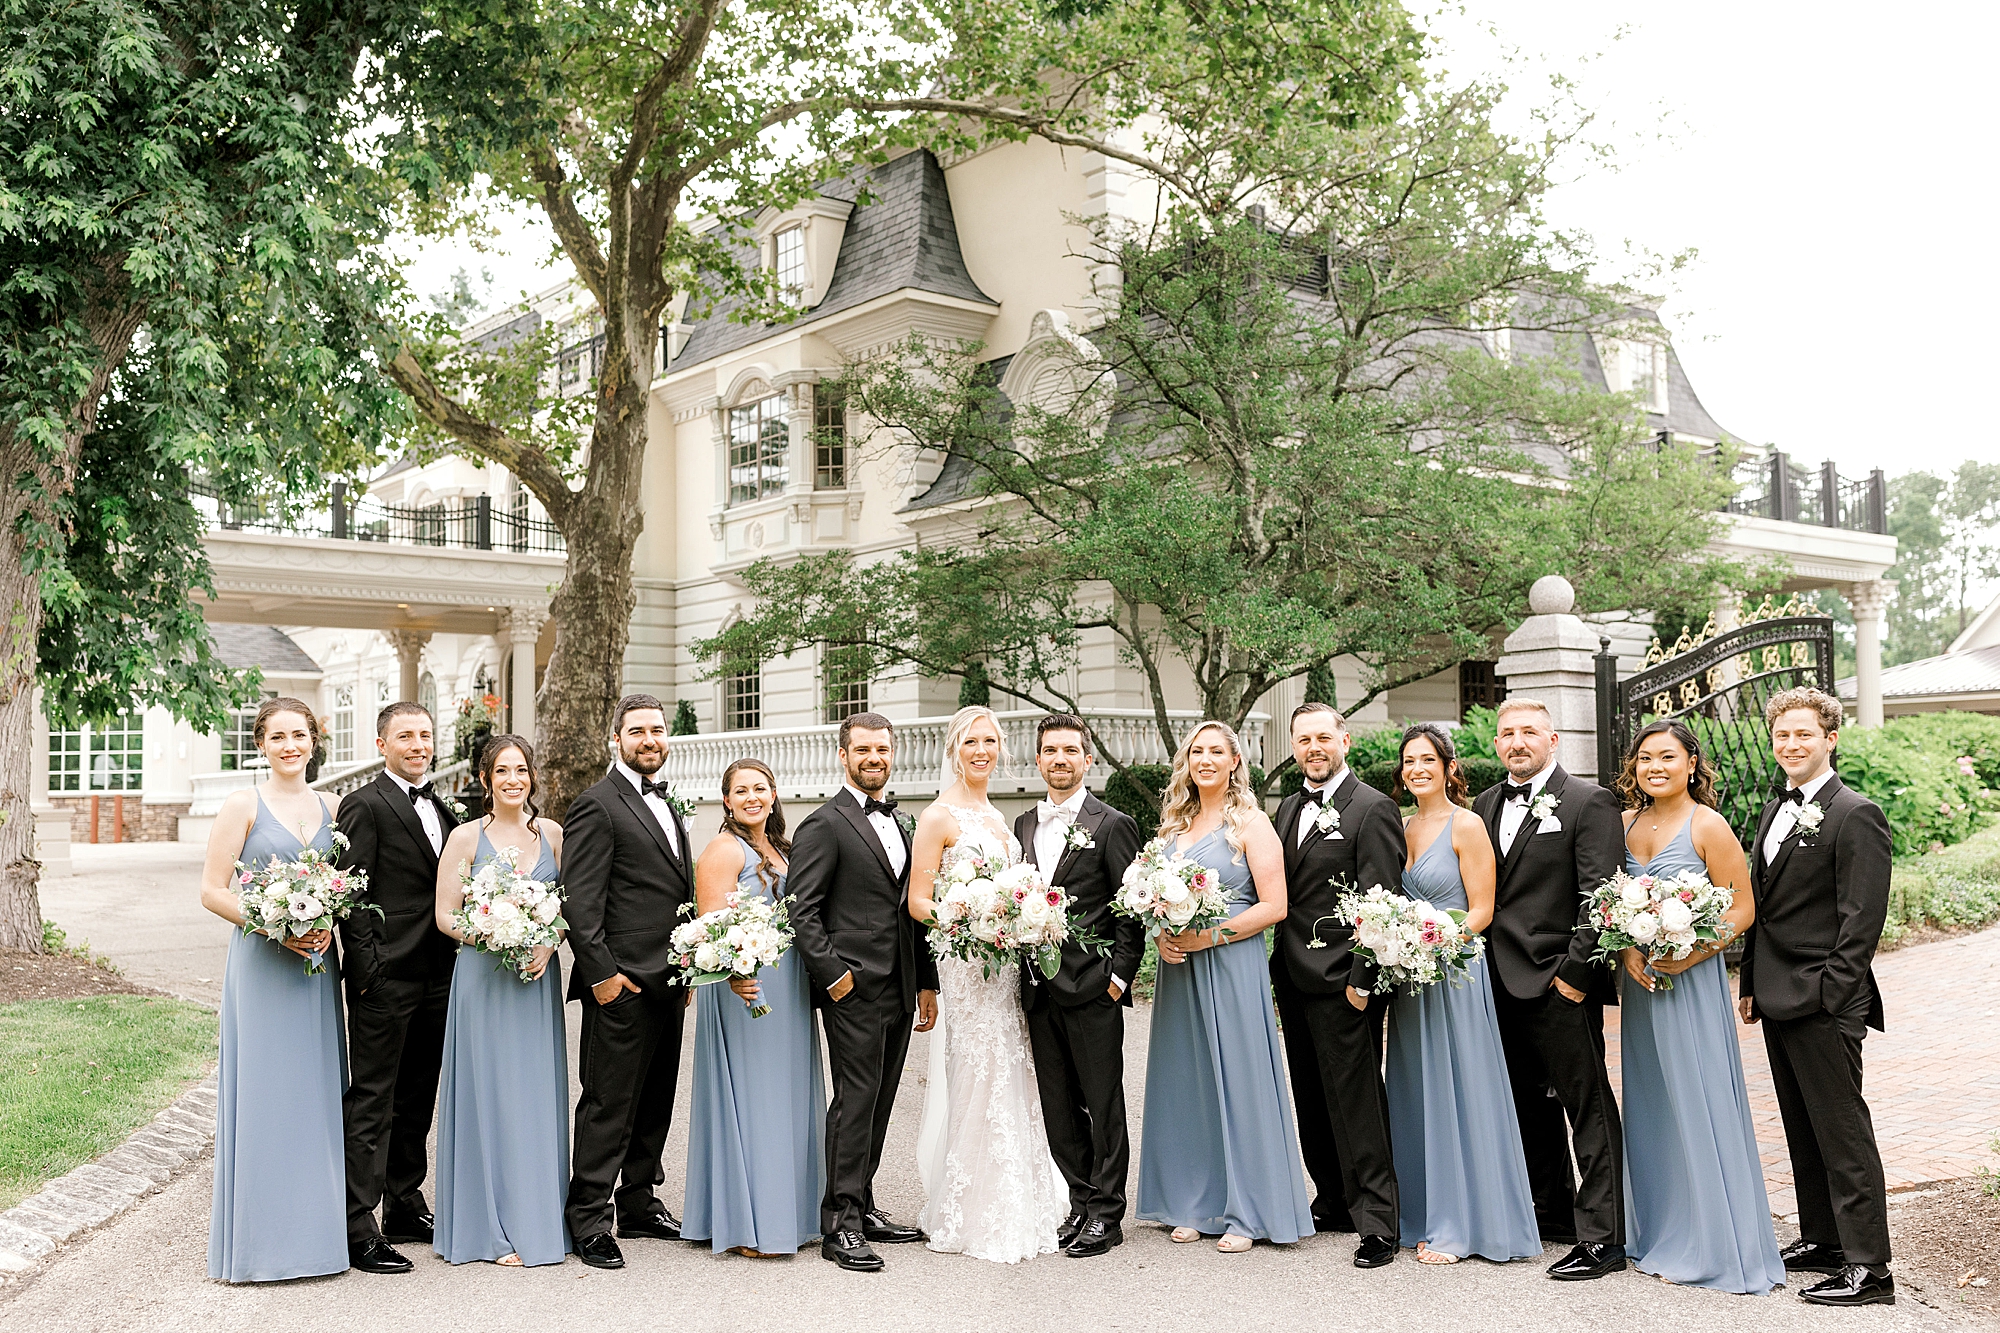 bride and groom stand with wedding party in blue and black for classic summer wedding at the Ashford Estate